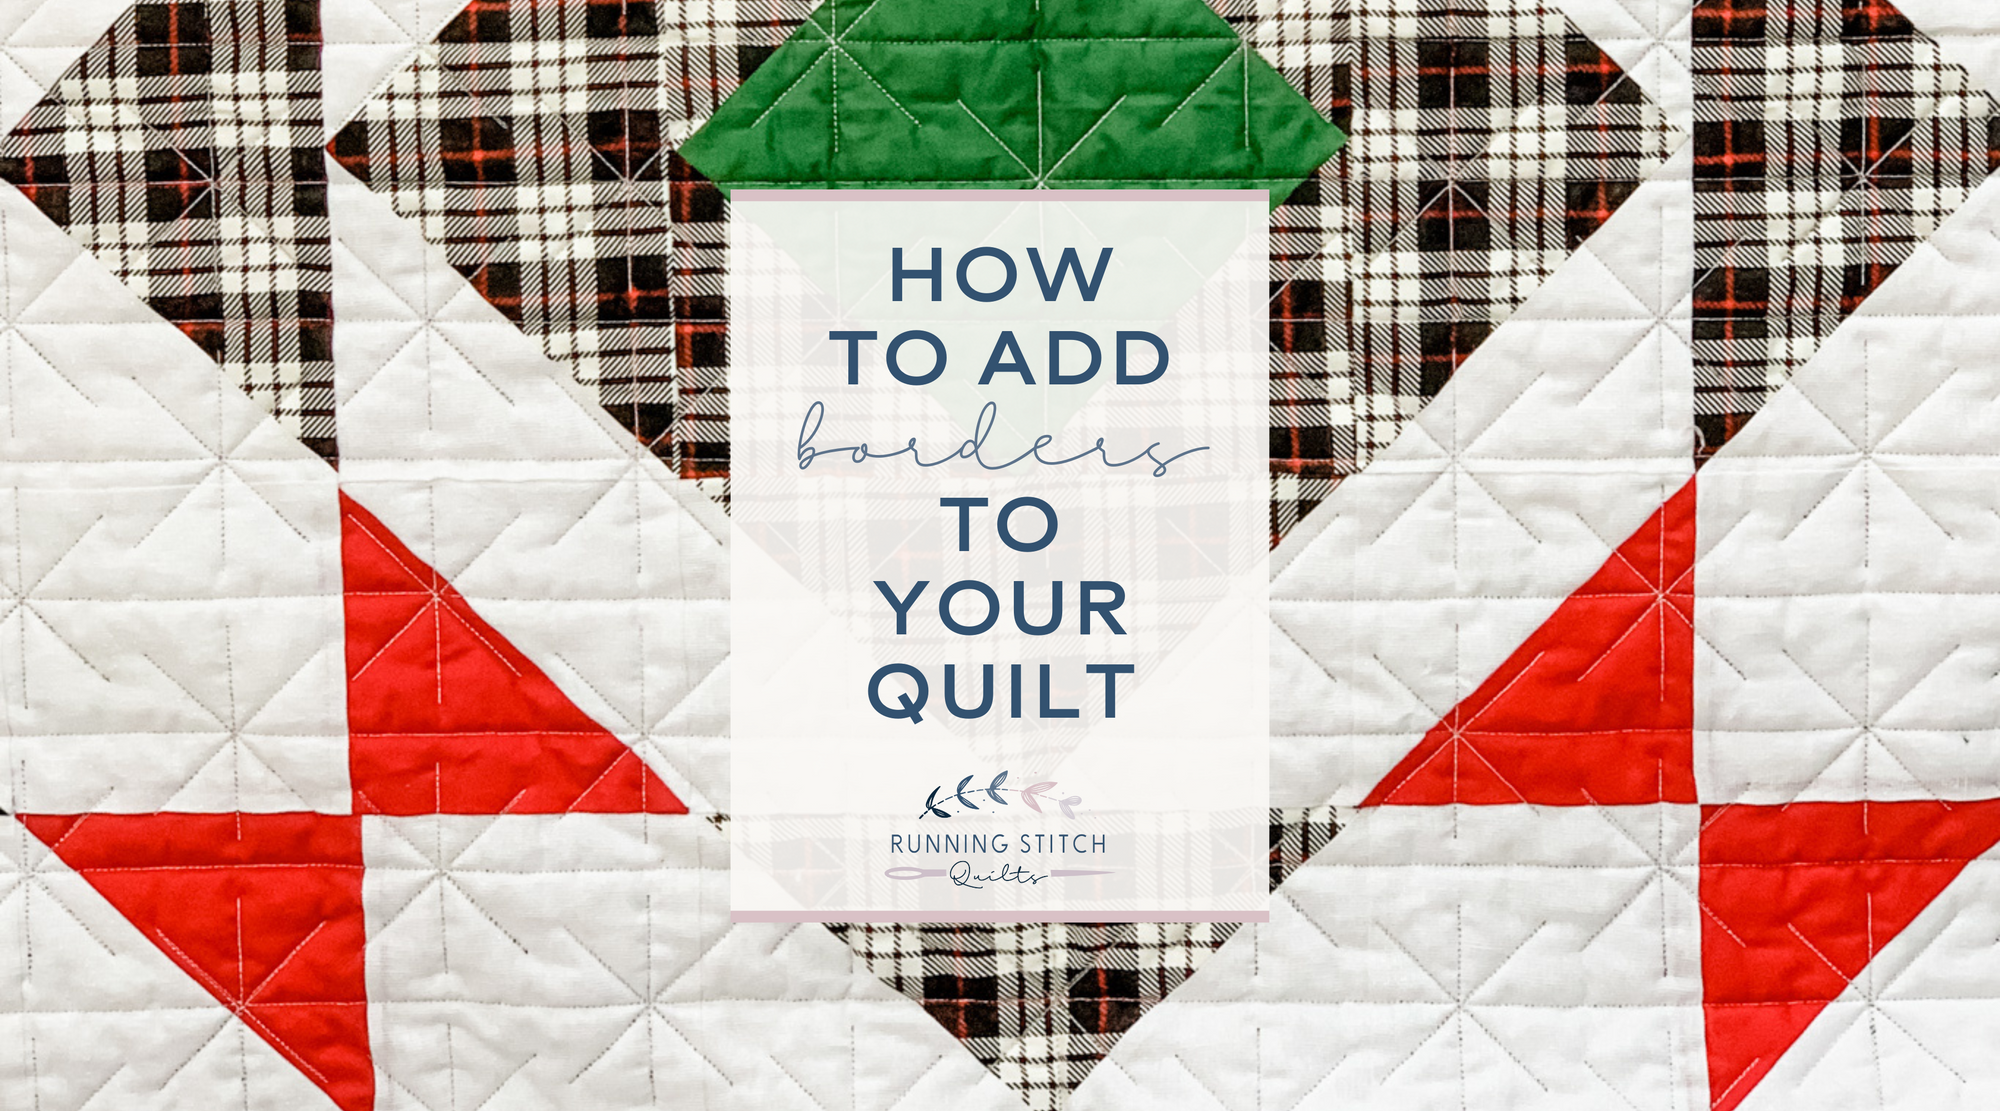 How to Add Borders to your Quilt